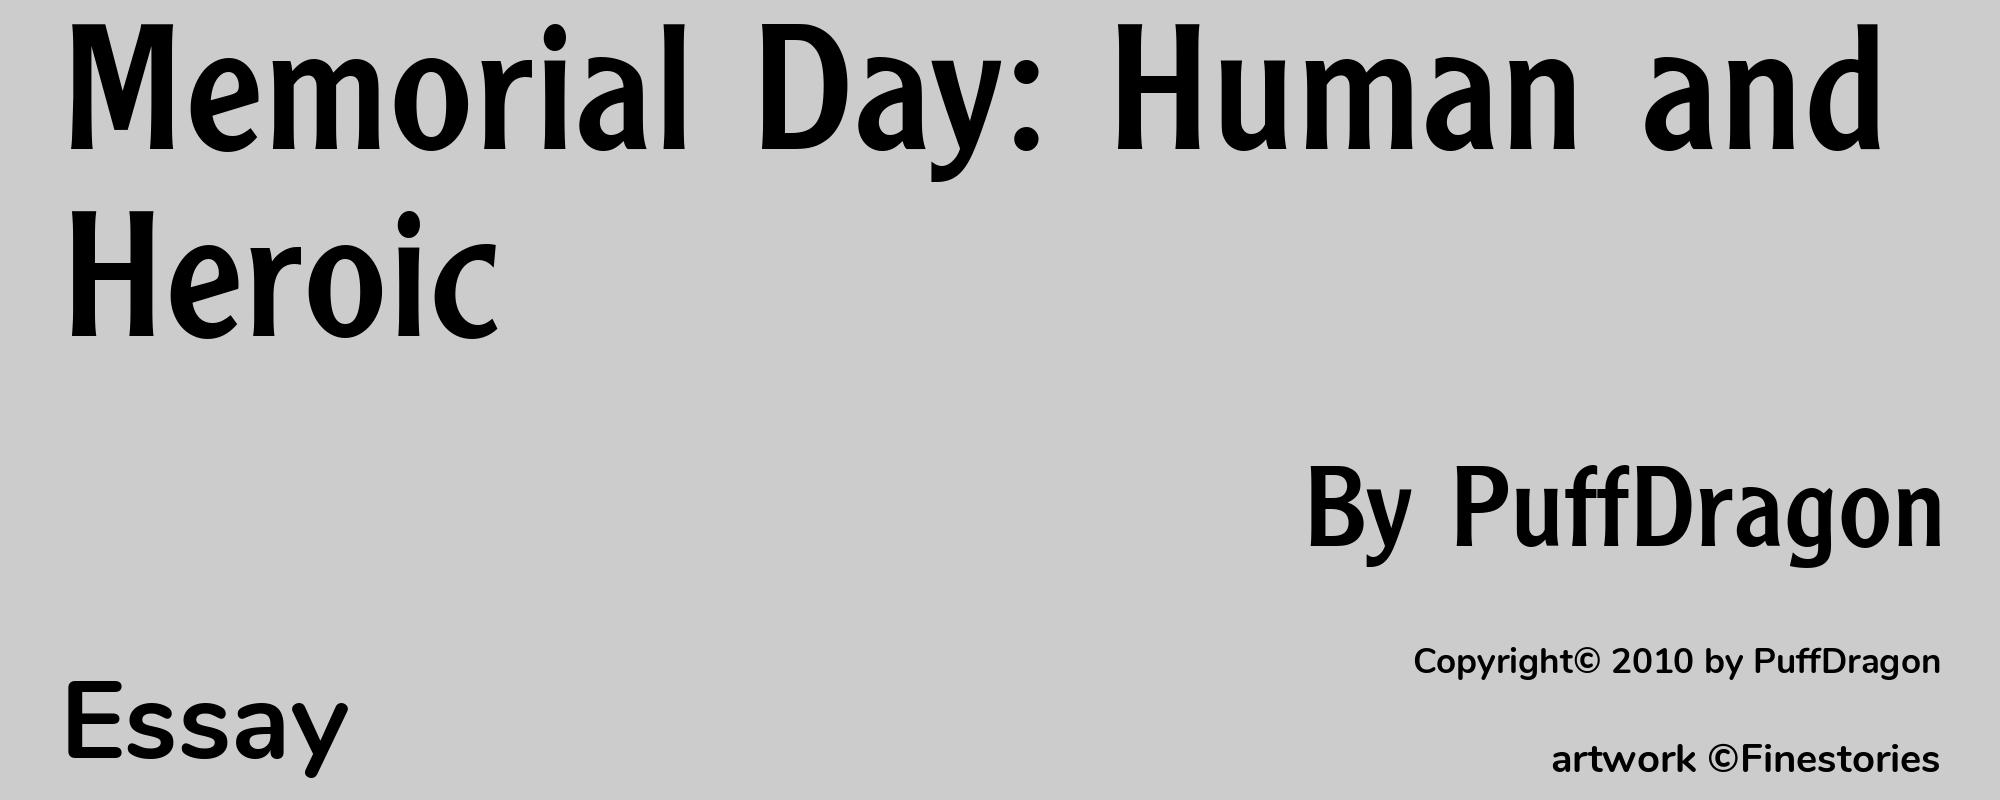 Memorial Day: Human and Heroic - Cover